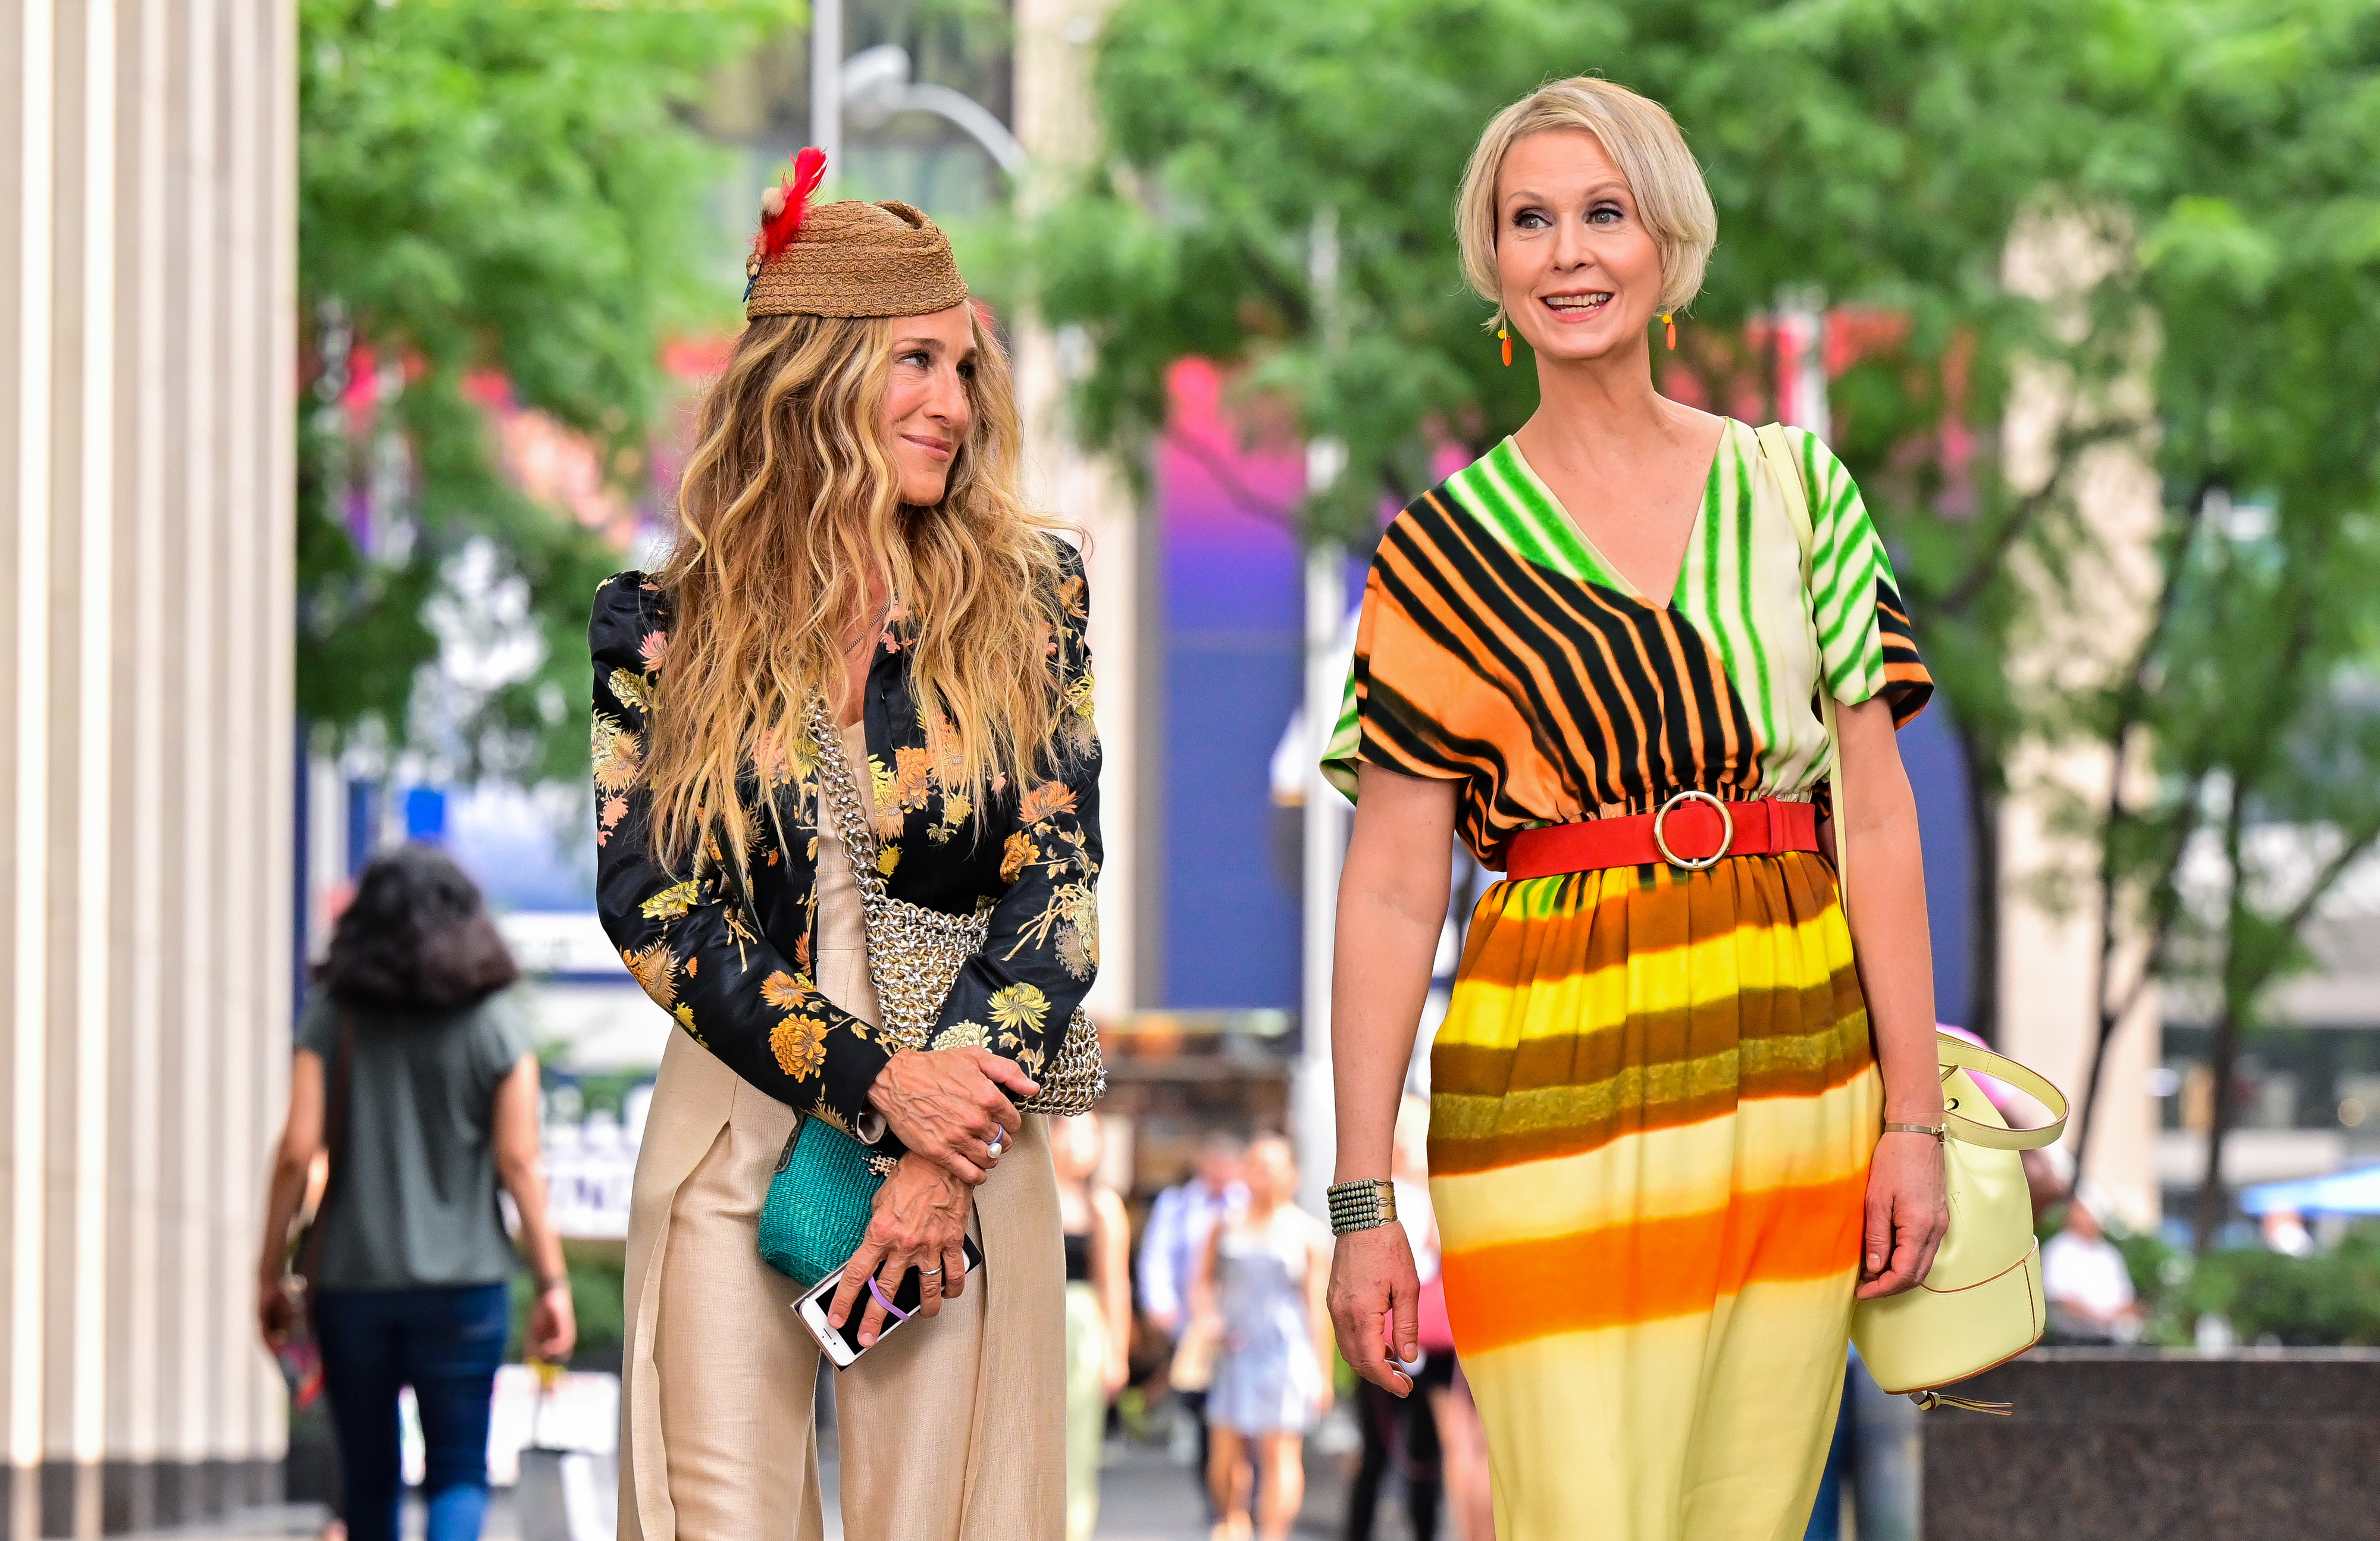 Sarah Jessica Parker and Cynthia Nixon on set wearing patterned dresses with distinctive accessories